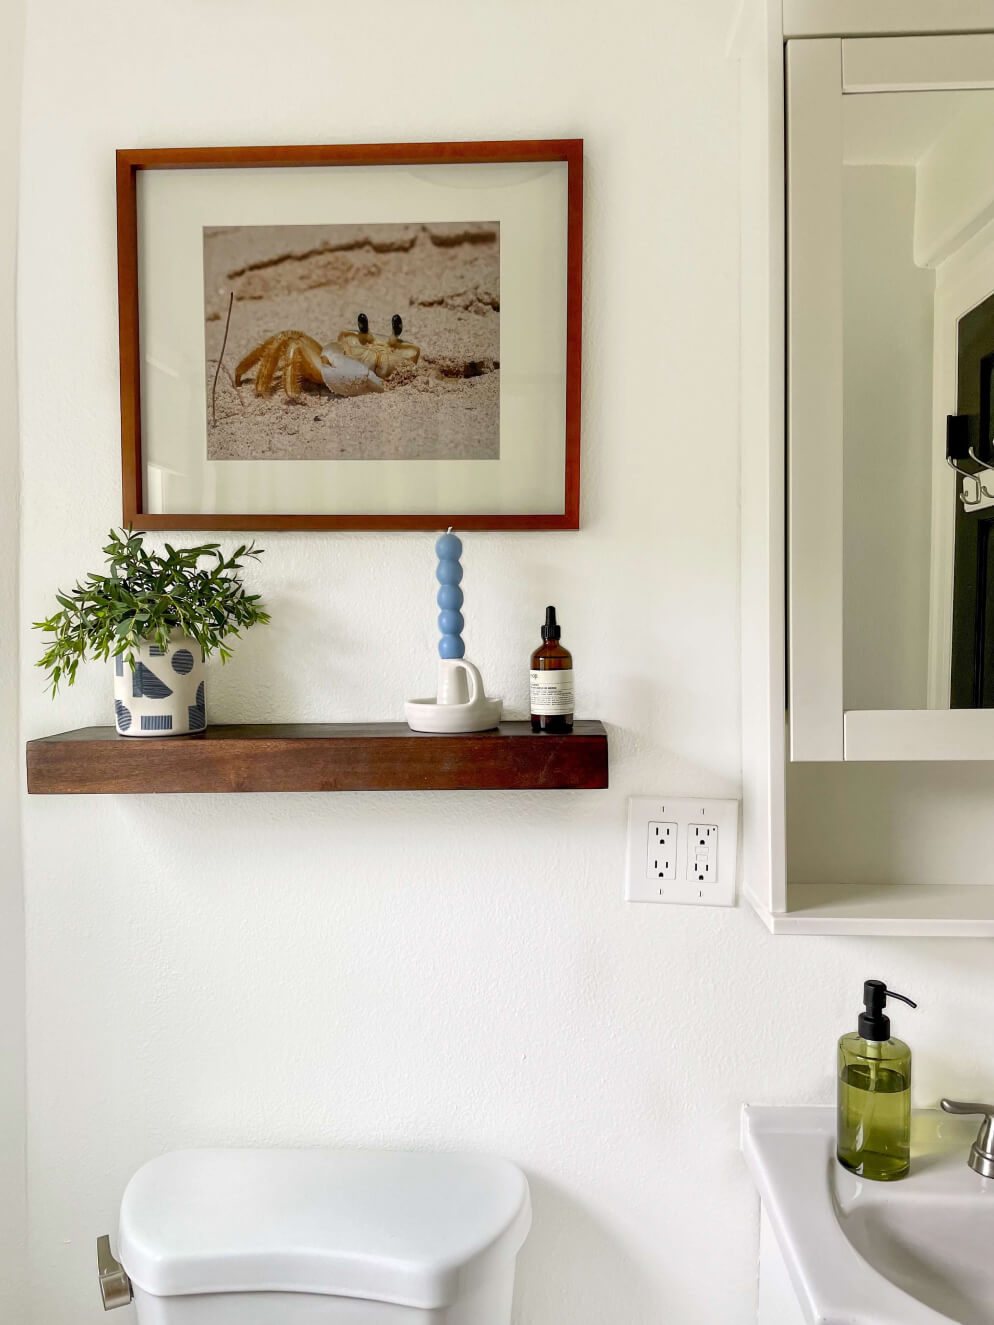 Bathroom with shelf and blue candle